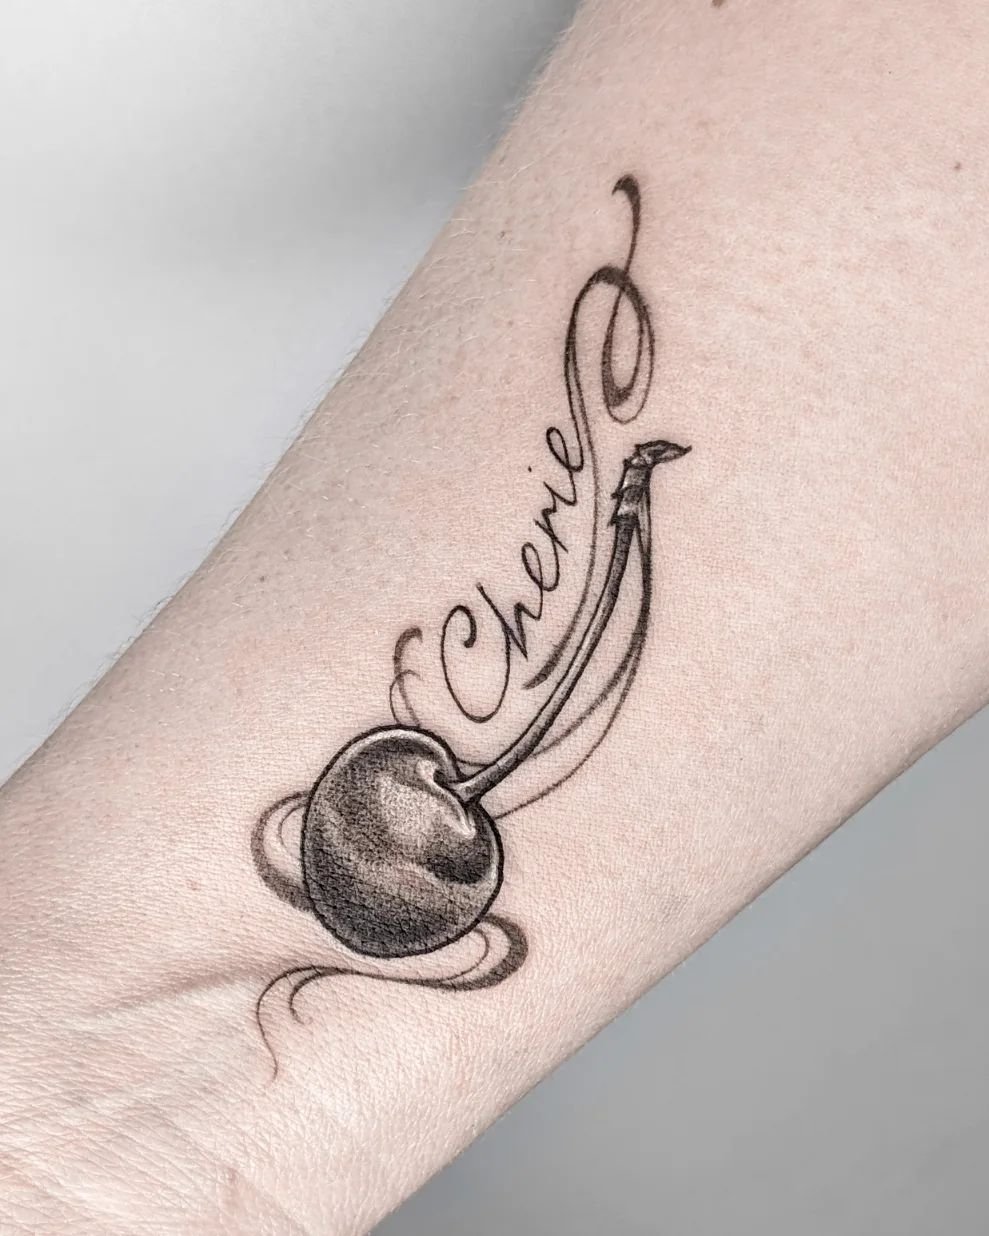 A Cherry for Cherie 🍒 

Small design are very welcome. 
For appointments: 
e.swan.art@outlook.com or DM

#tattoo #tattooartist #tattooist #latvianartist #art #artist #latviantattooartist #cherry #charrytattoo #smalltattoo #berlin #berlintattoo